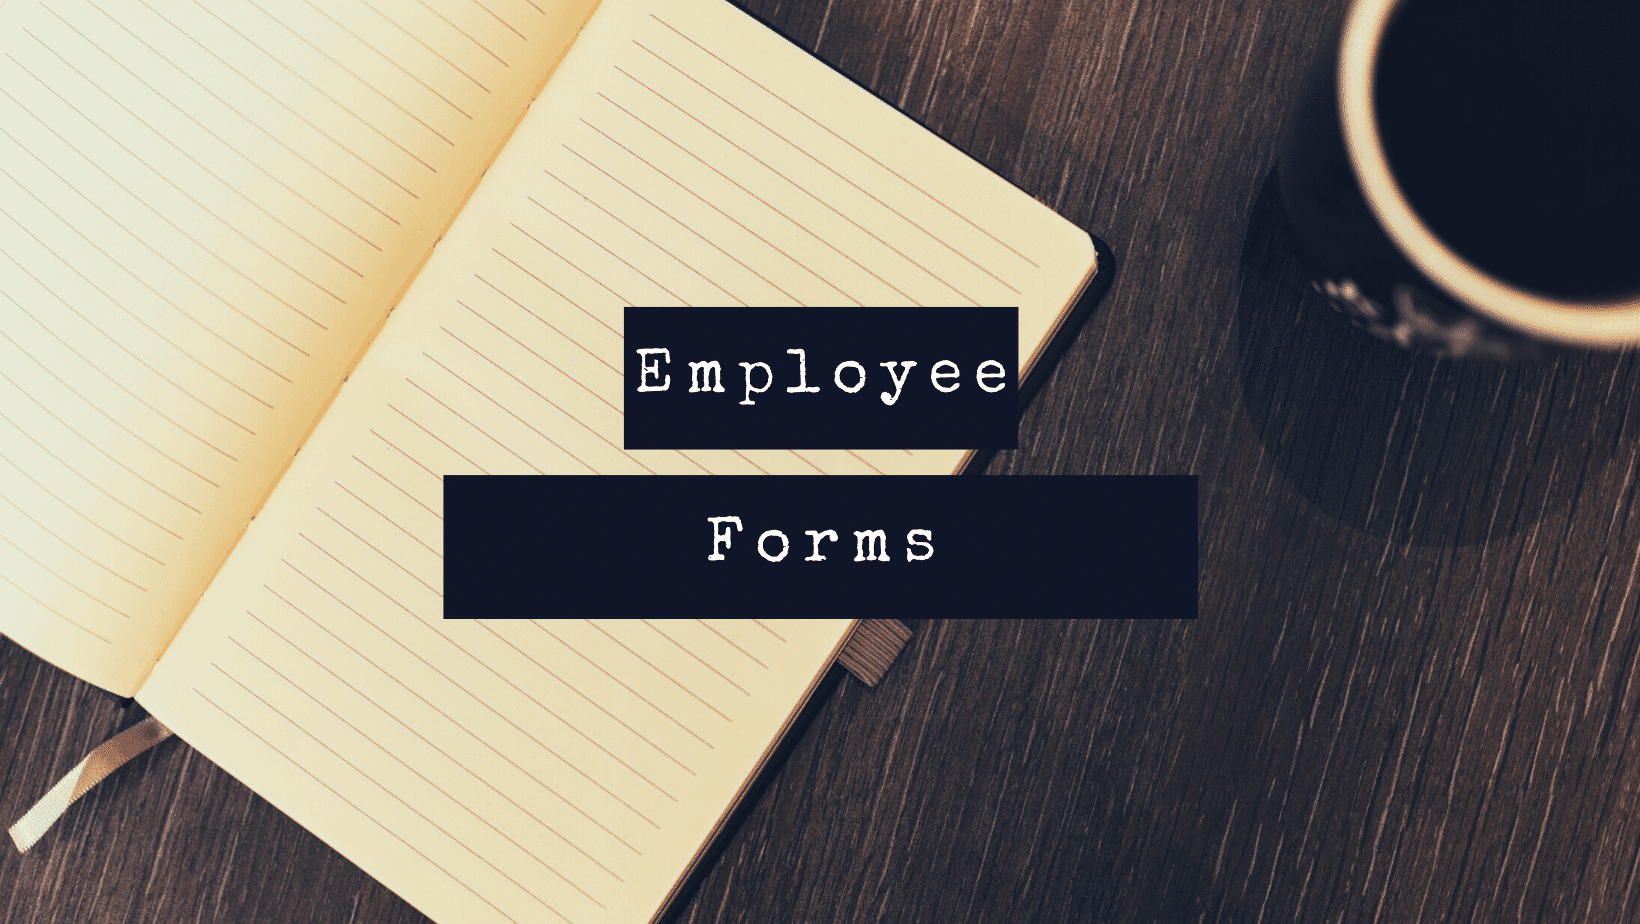 Employee Forms